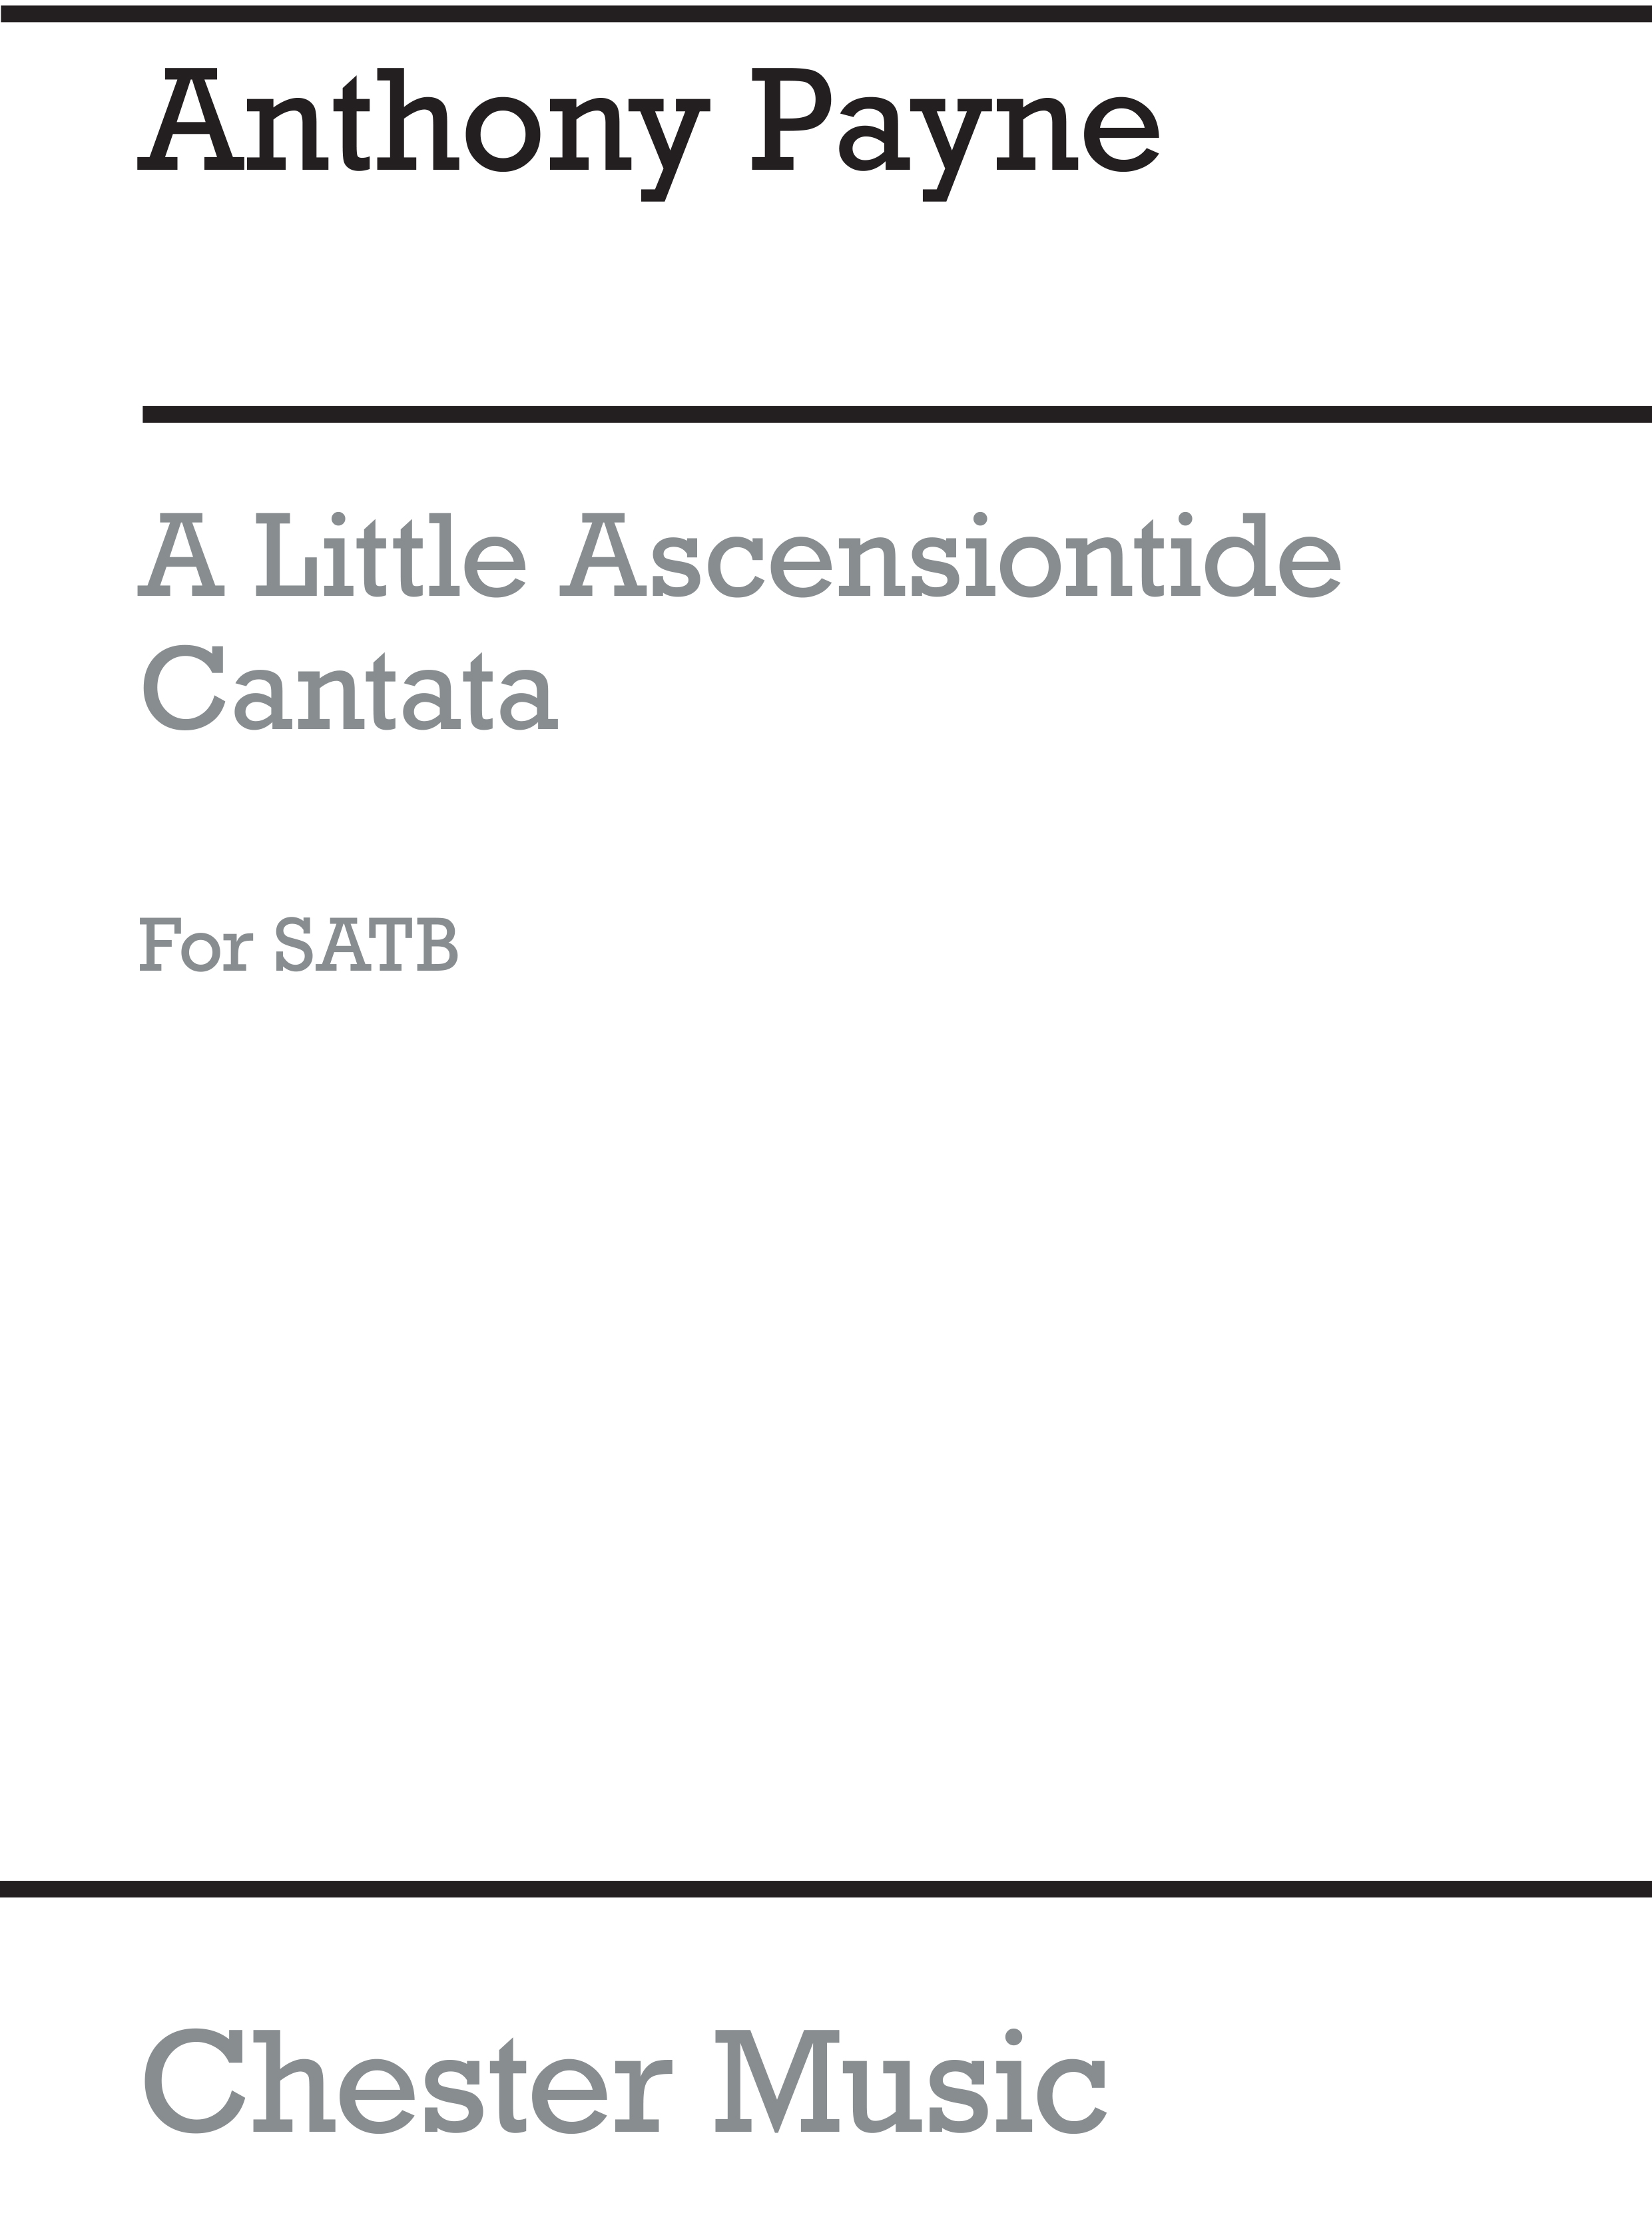 Anthony Payne: Little Ascensiontide Cantata for SATB Chorus: SATB: Vocal Score